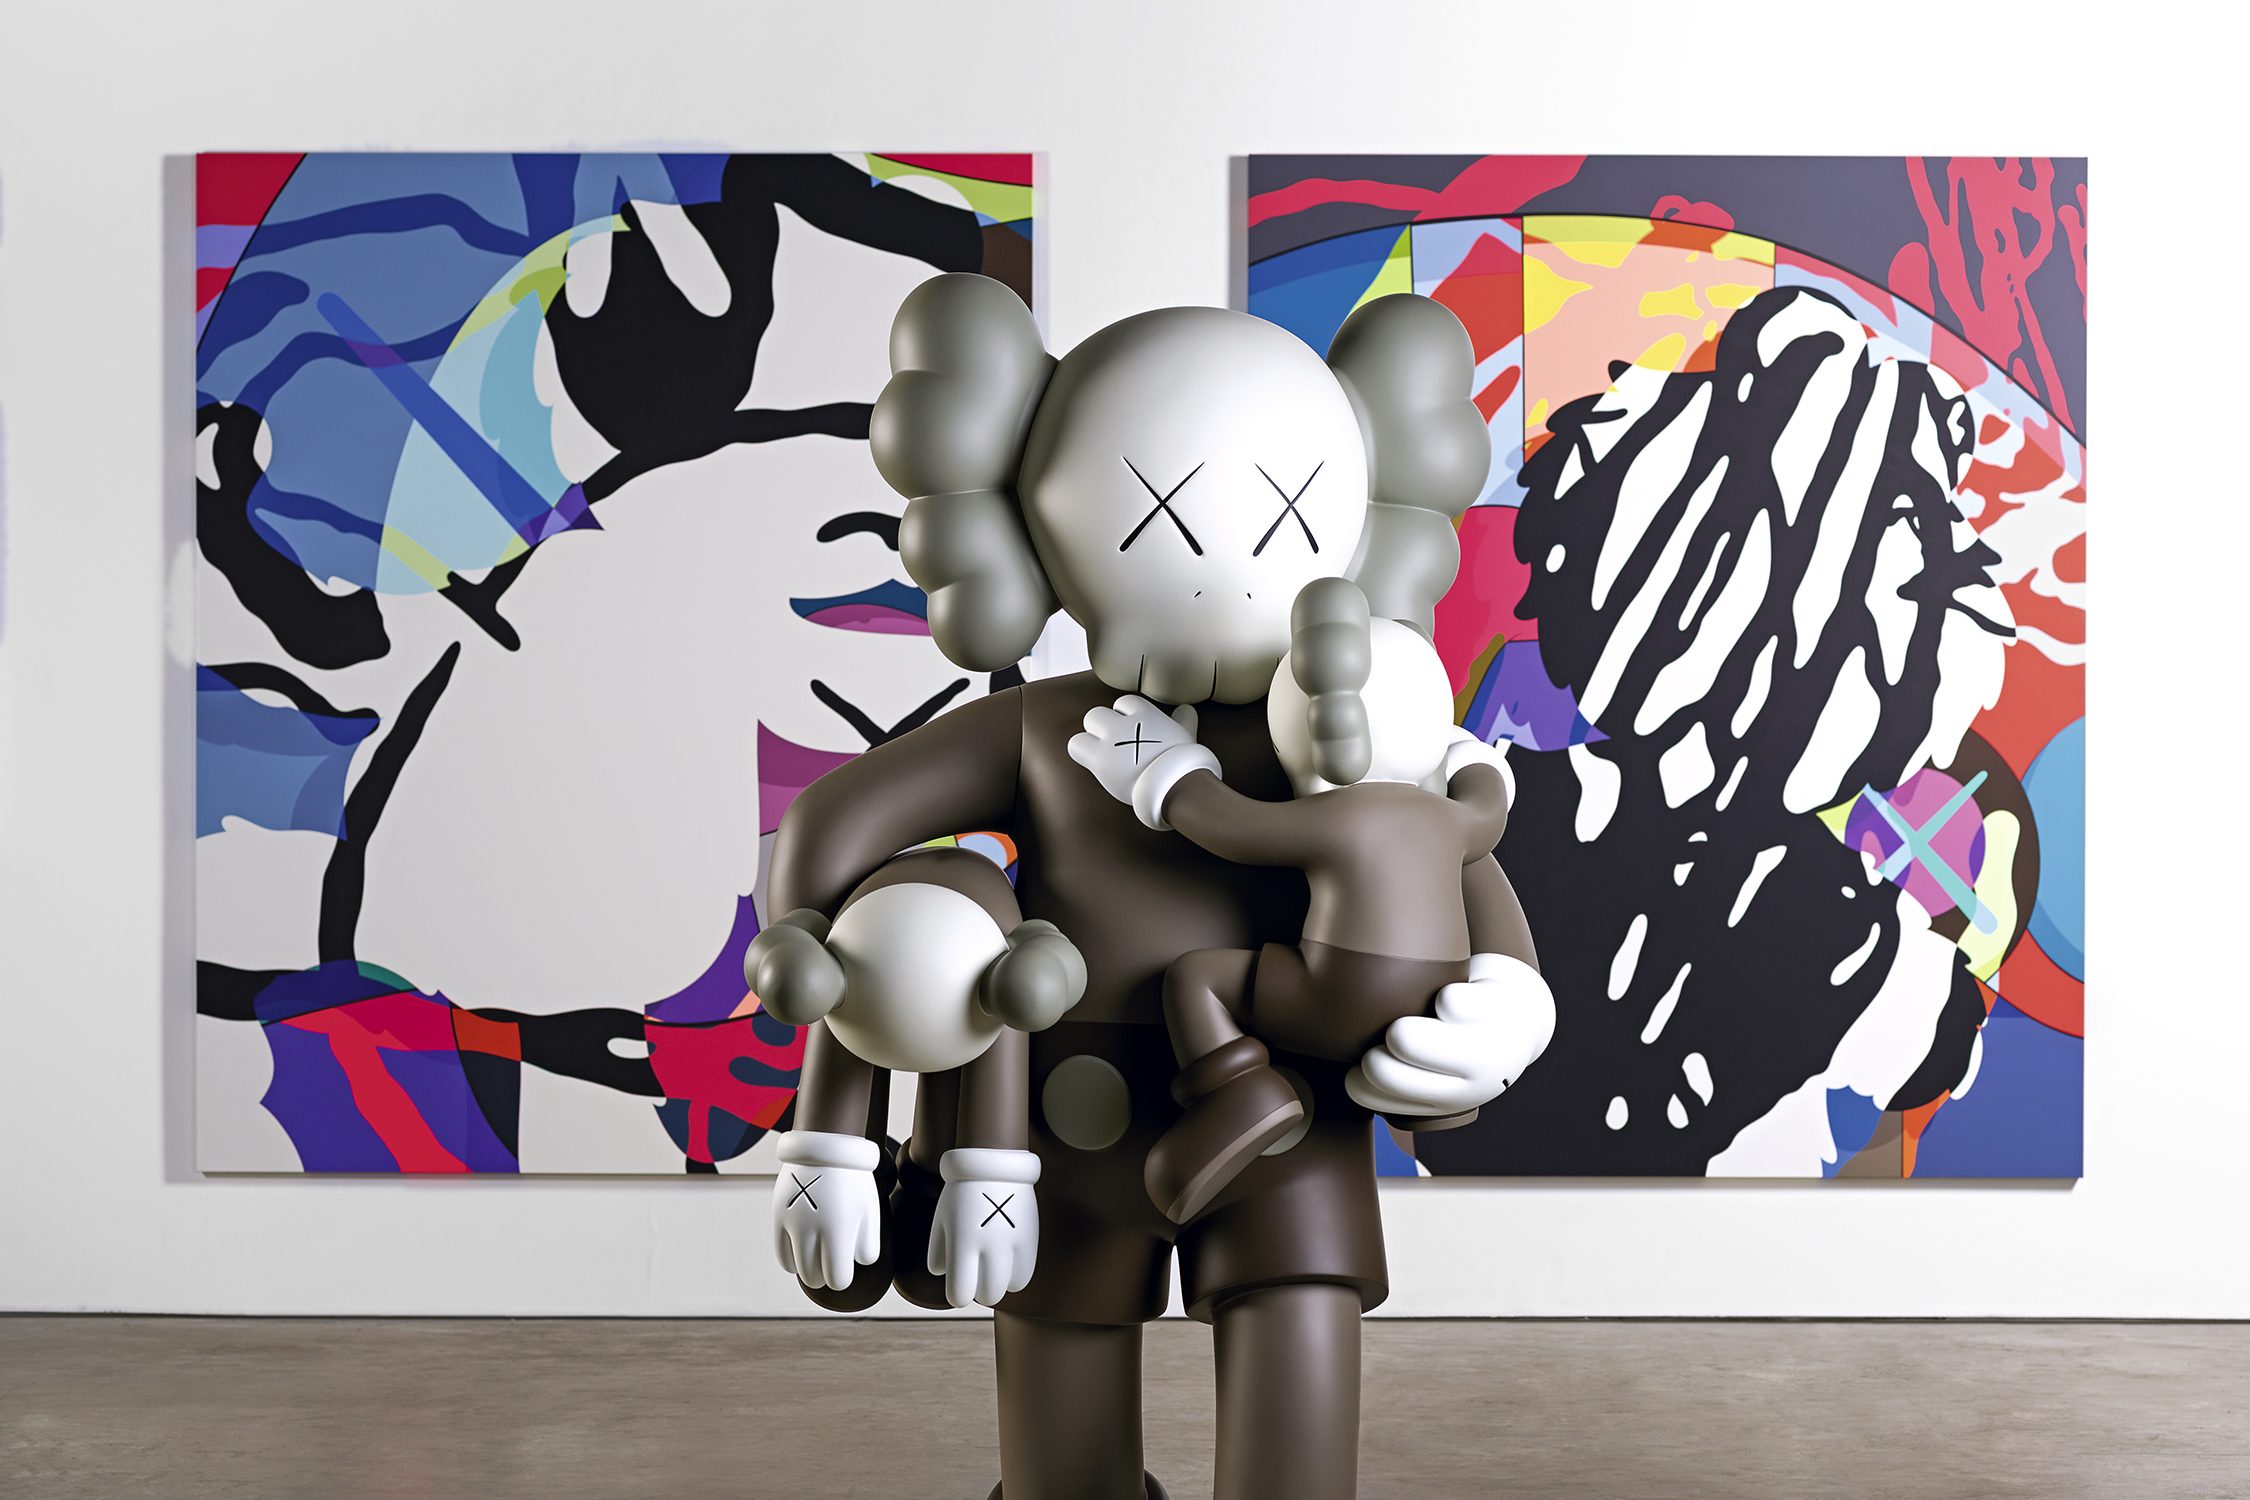 KAWS: Companionship in the age of loneliness